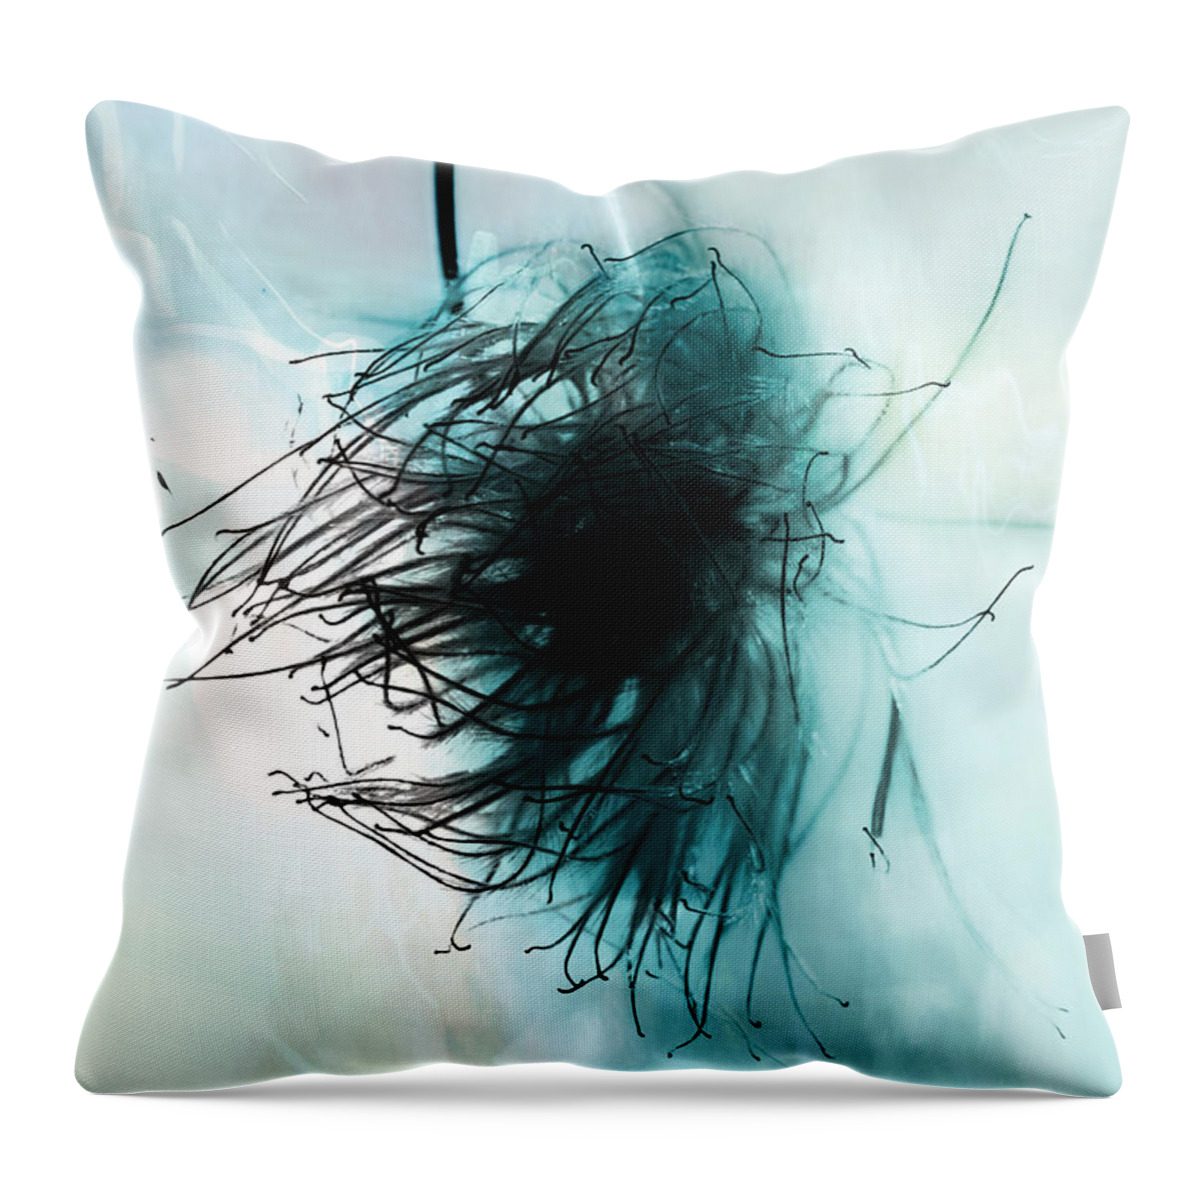 Flower Throw Pillow featuring the photograph Smear Of Tears by J C